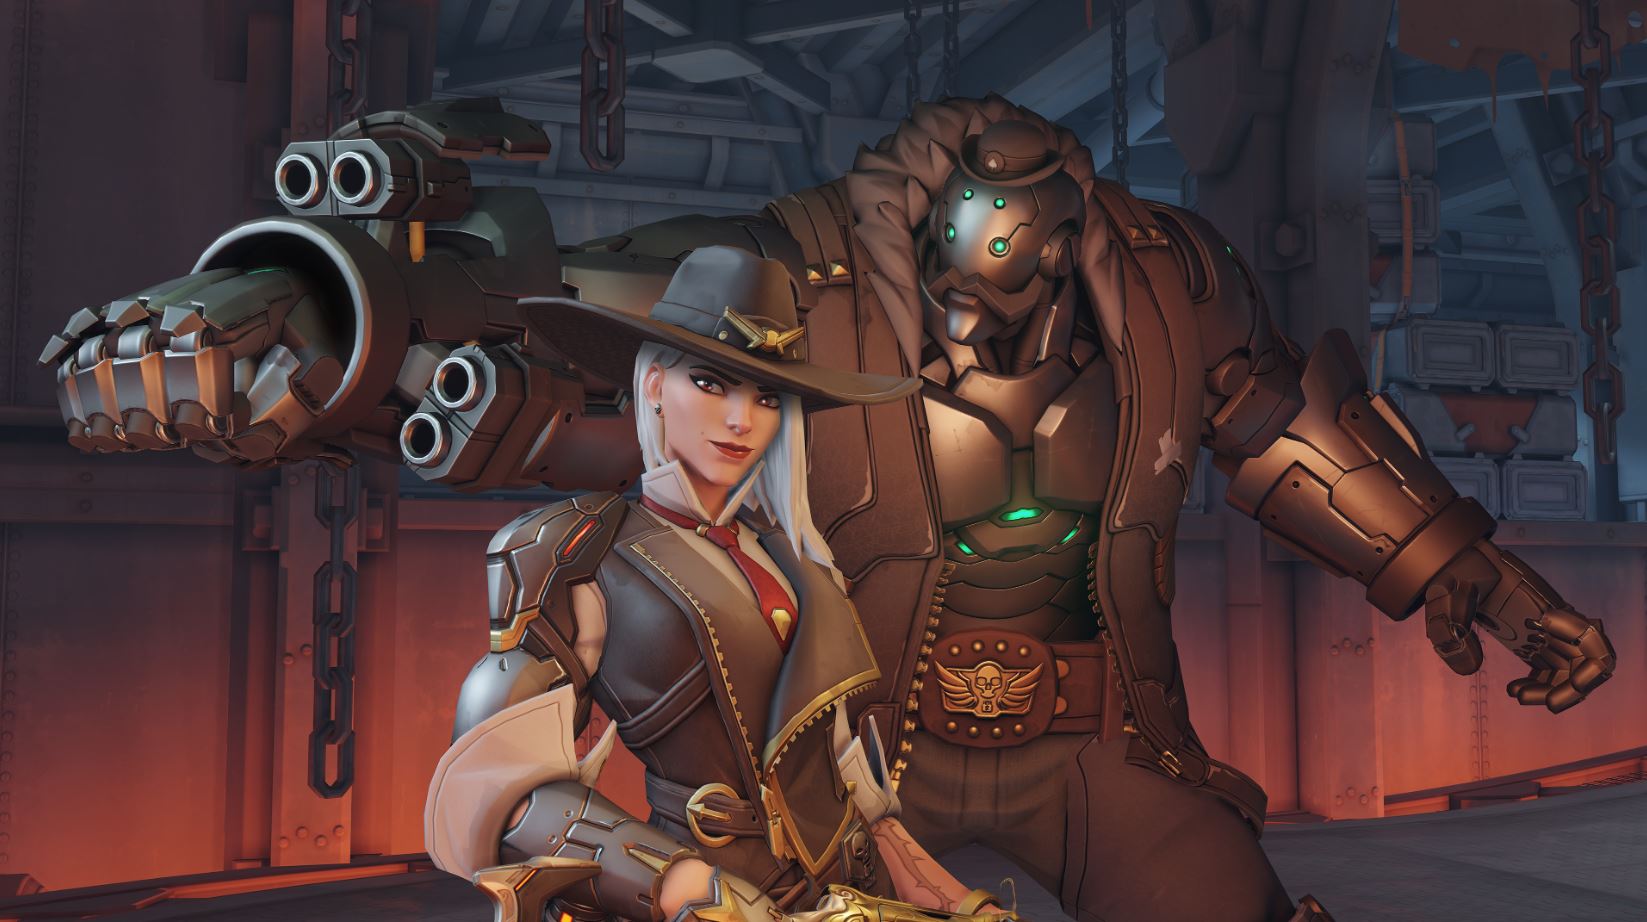 New hero Ashe is now available in Overwatch